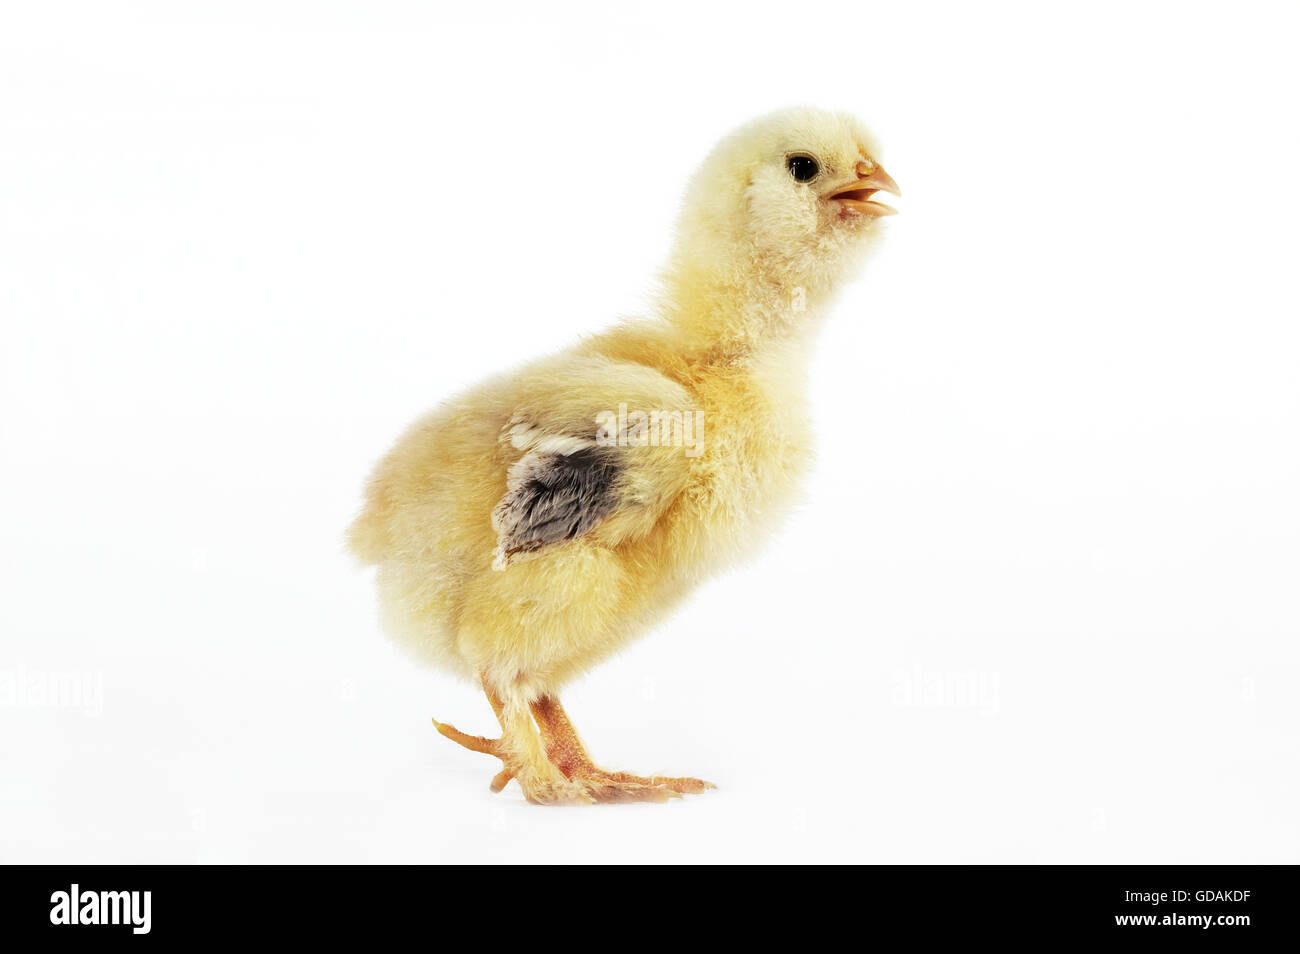 Domestic Chicken, Chick against White Background Stock Photo